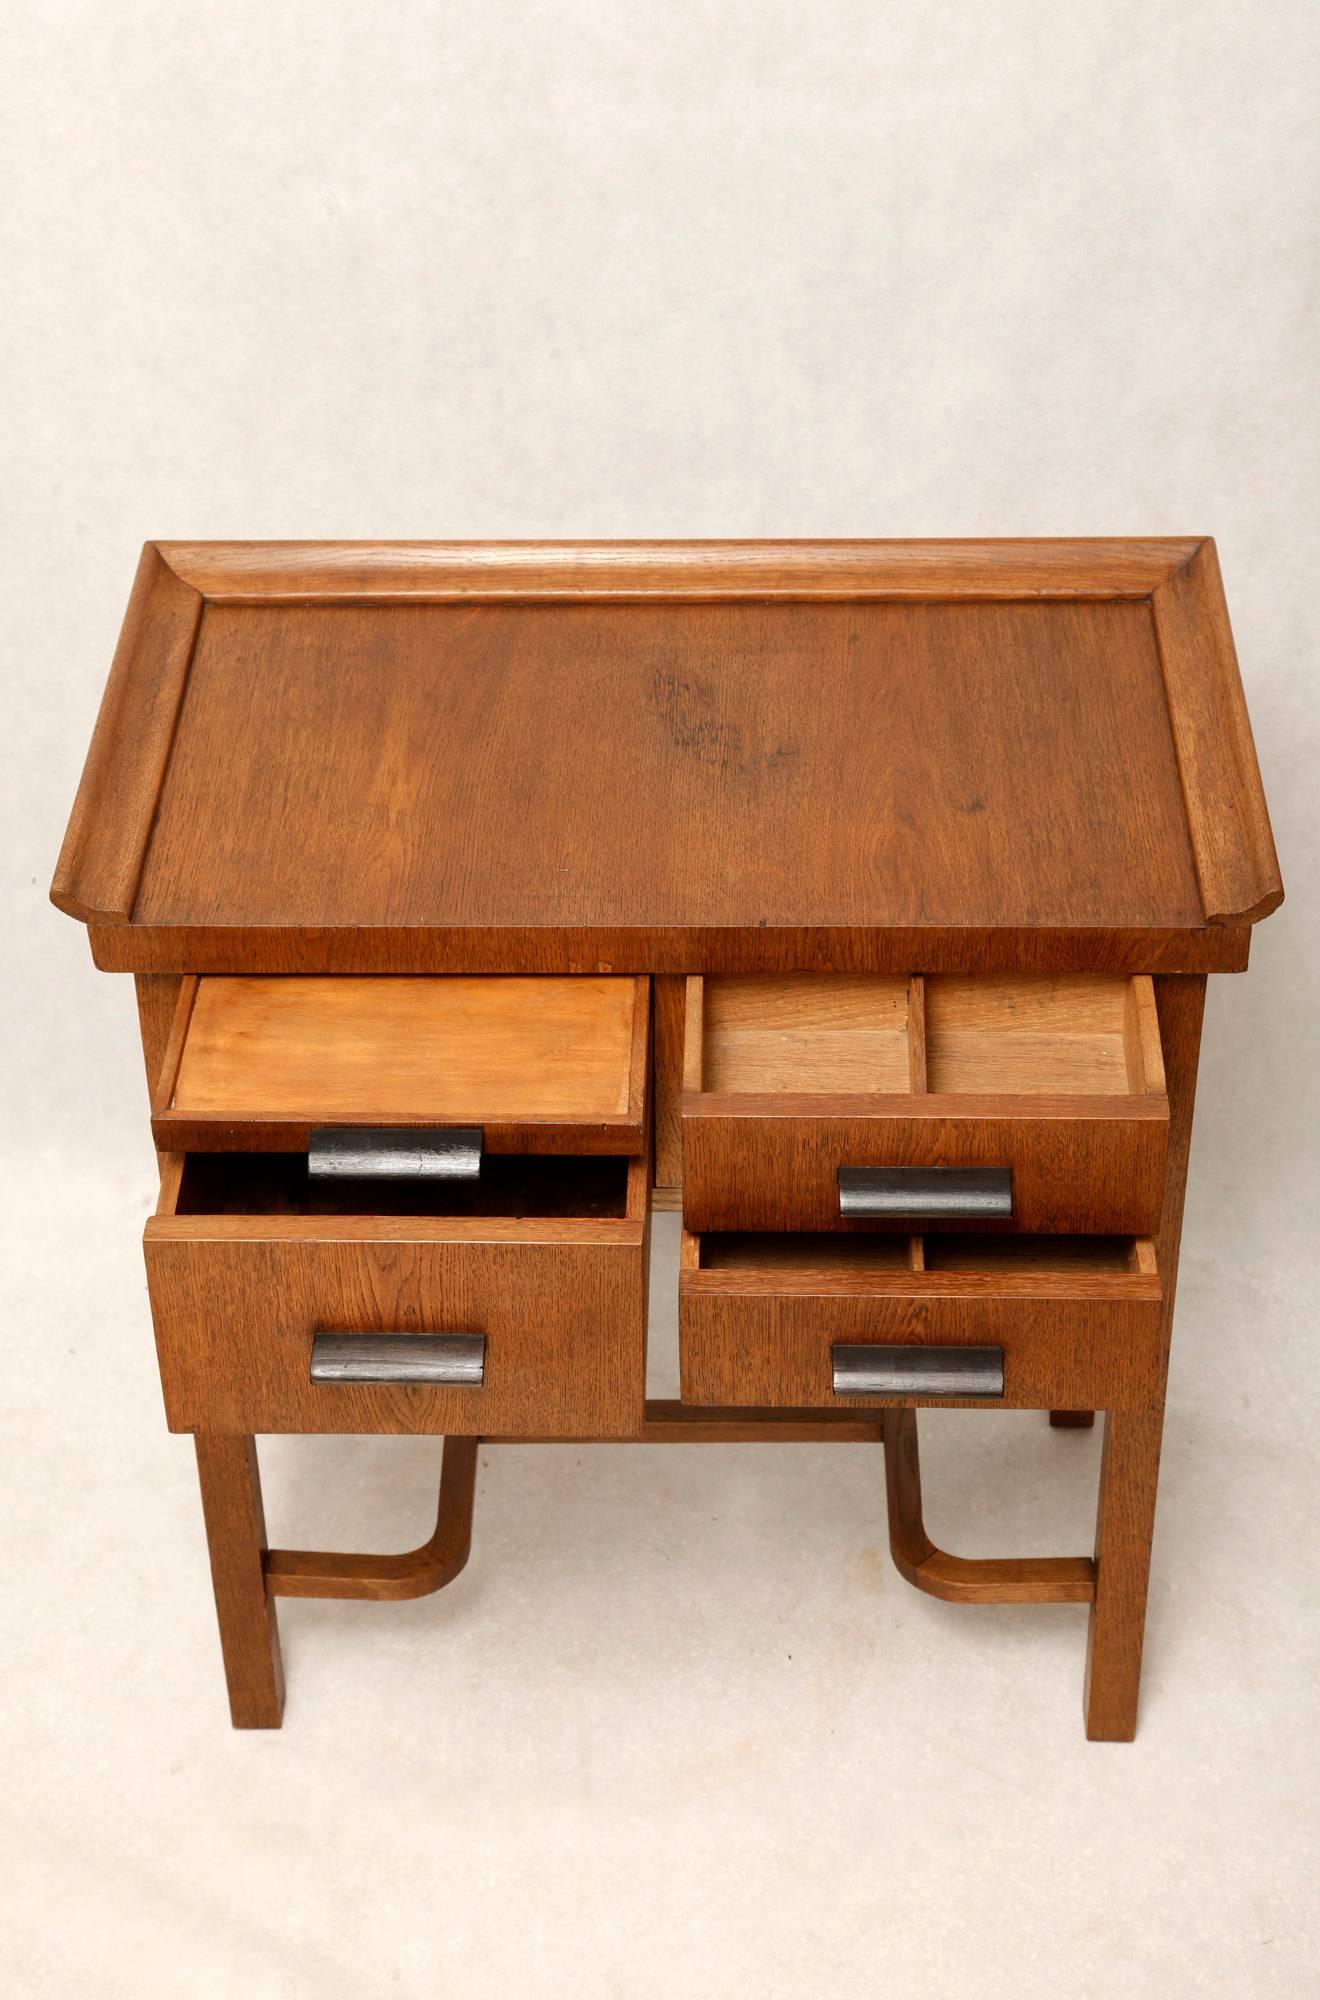 Hand-Crafted Art Deco Dressing Table, Oak and Vintage, 1950s